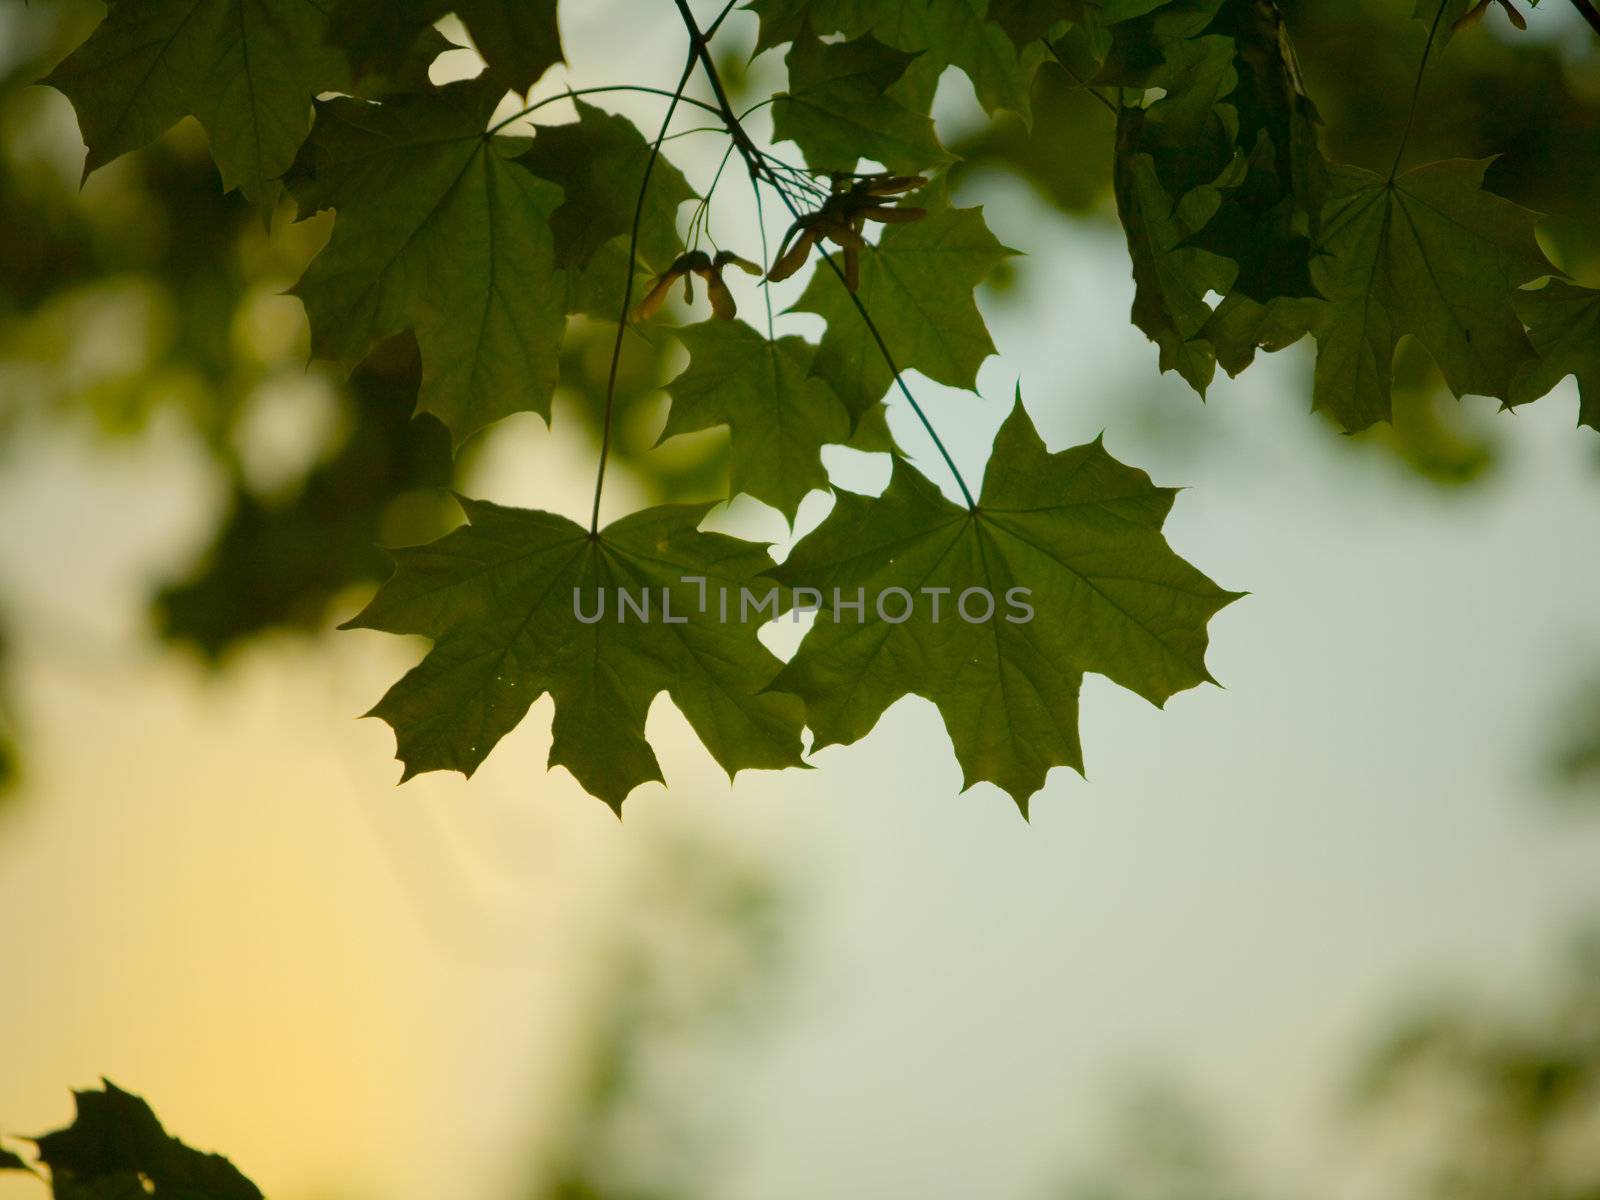 Maple leaves in low light at dawn, colorful sky in the background